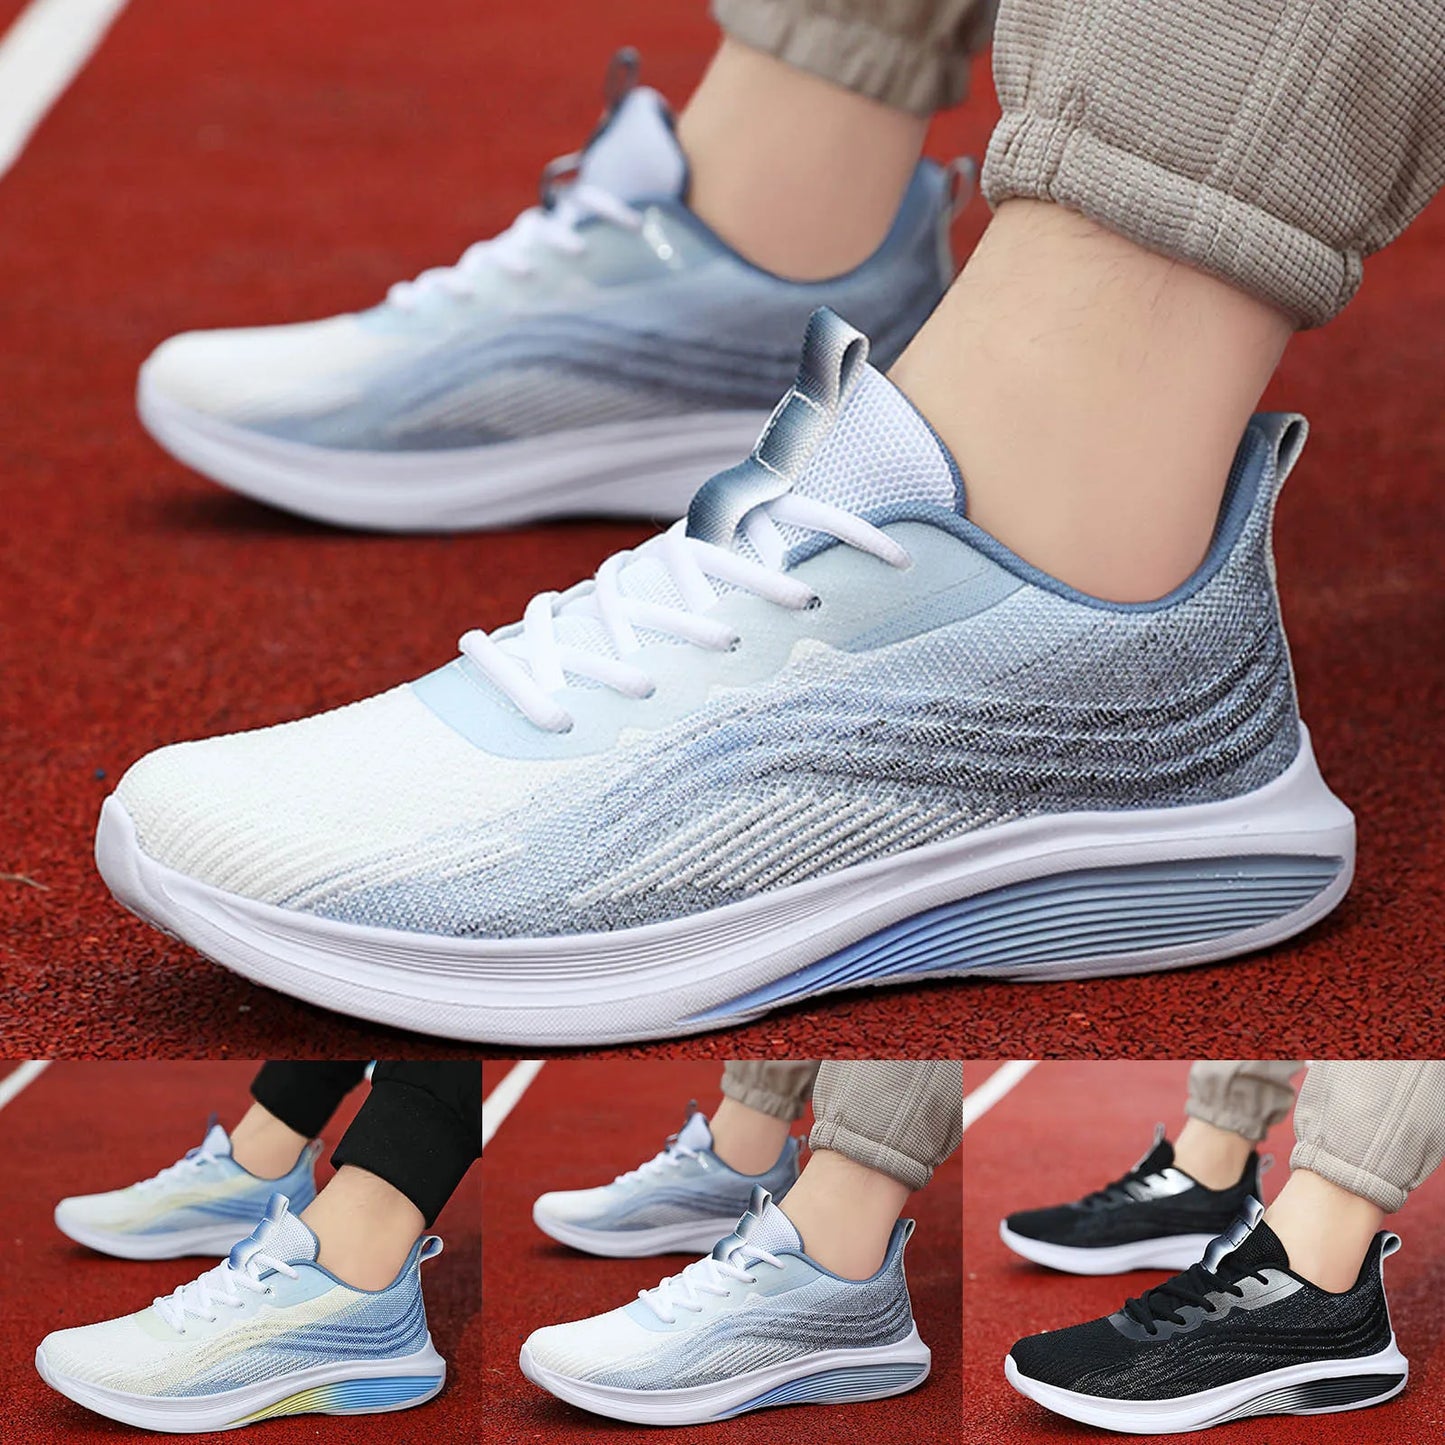 Men's Mesh Tennis Shoes Men/Casual Running Breathable Vulcanized Shoes